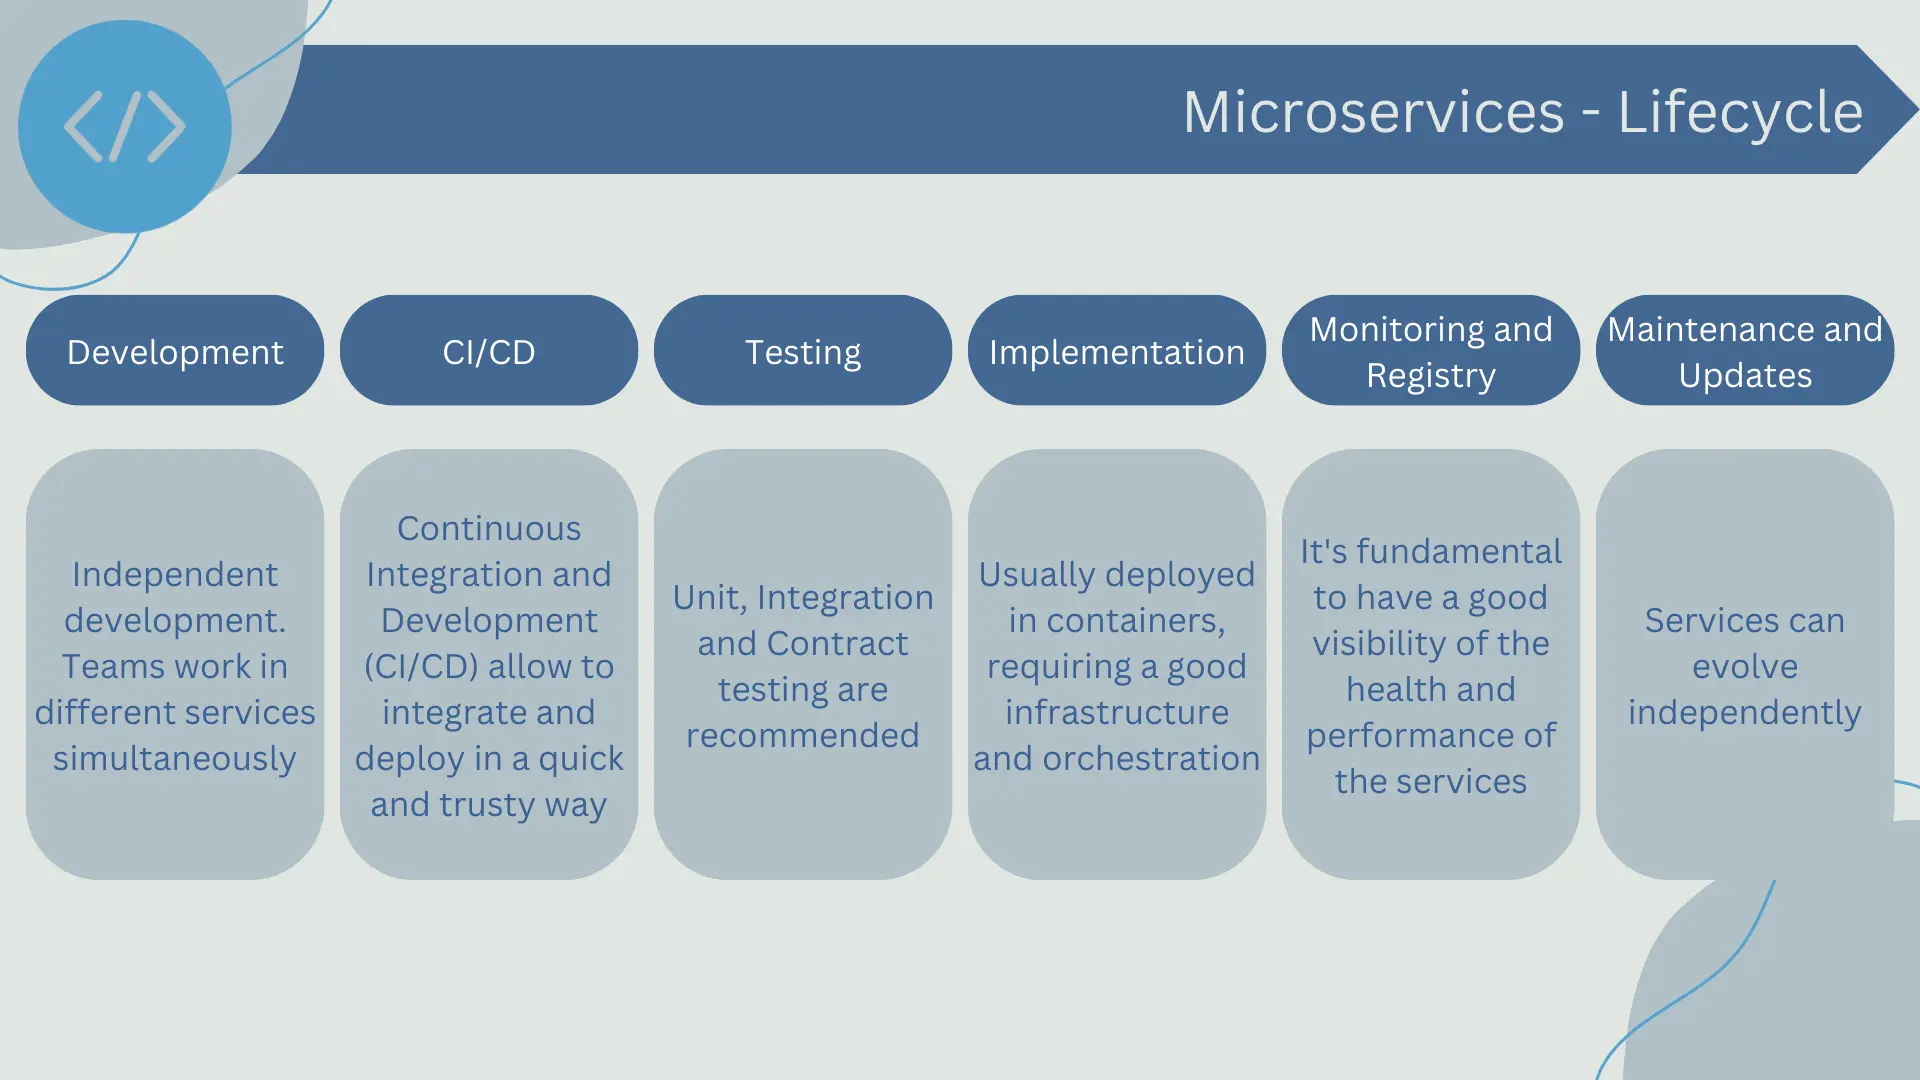 Microservices lifecycle